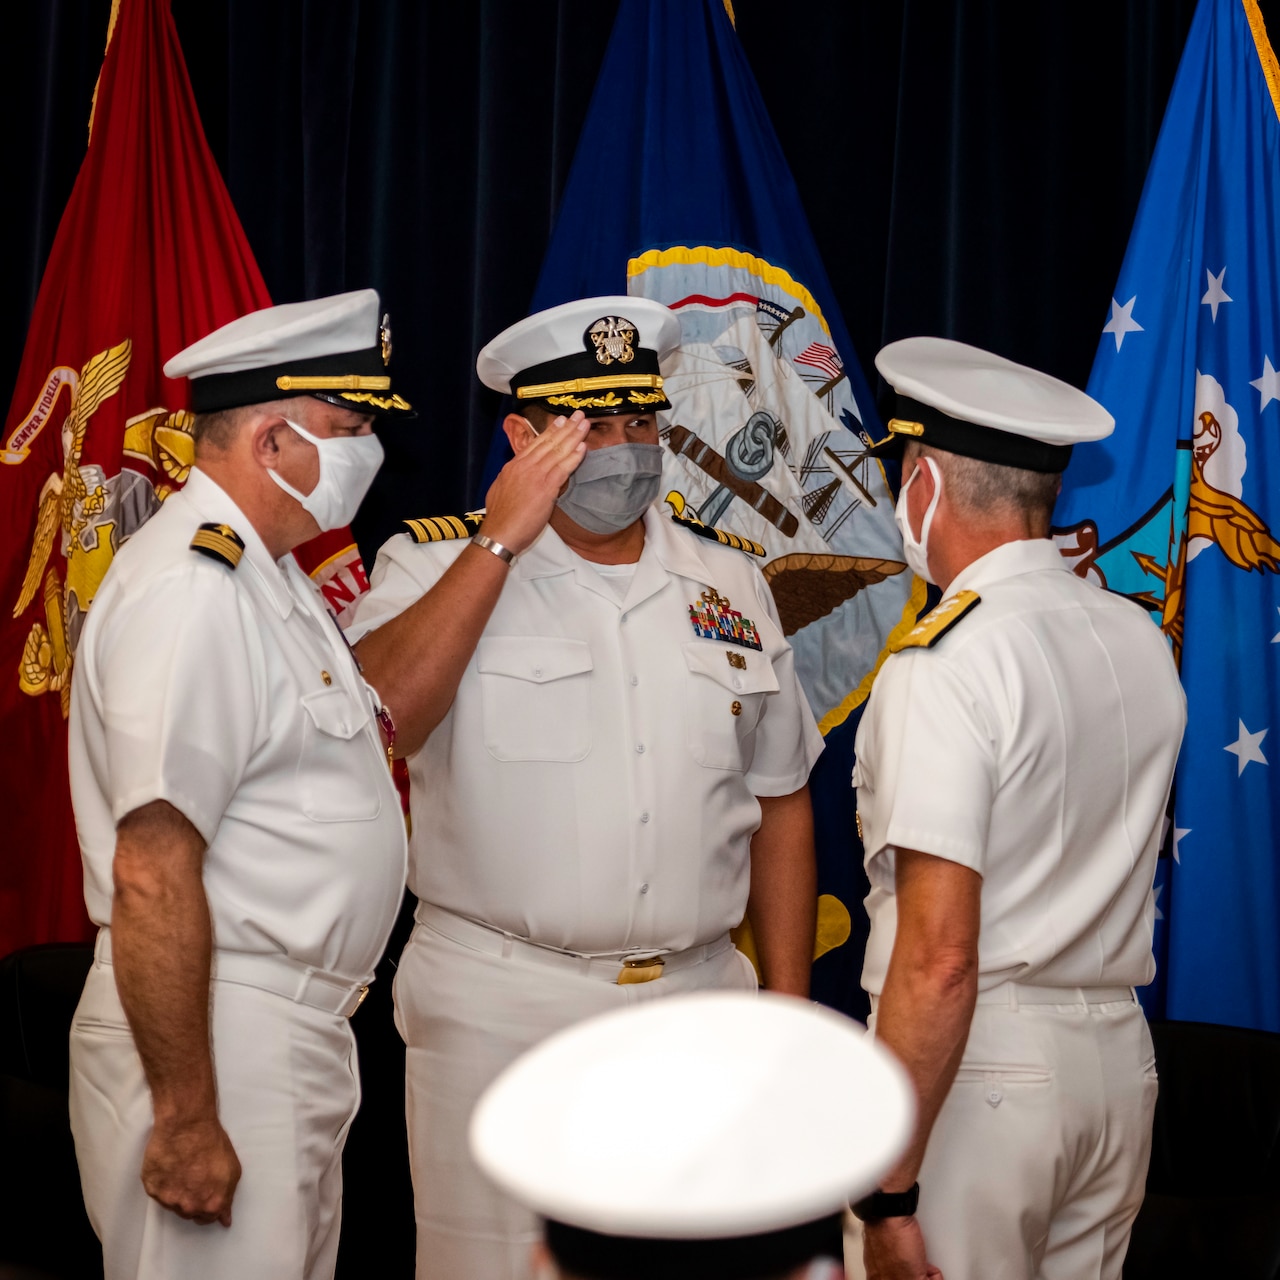 Capt. Dean Muriano, center, reports to Rear Adm. Pete Garvin, right, commander, Naval Education and Training Command (NETC), that he has relieved Capt. Keith Dowling, left, as commanding officer of the Center for Explosive Ordnance Disposal and Diving (CEODD) during a change of command ceremony, Sept. 22.